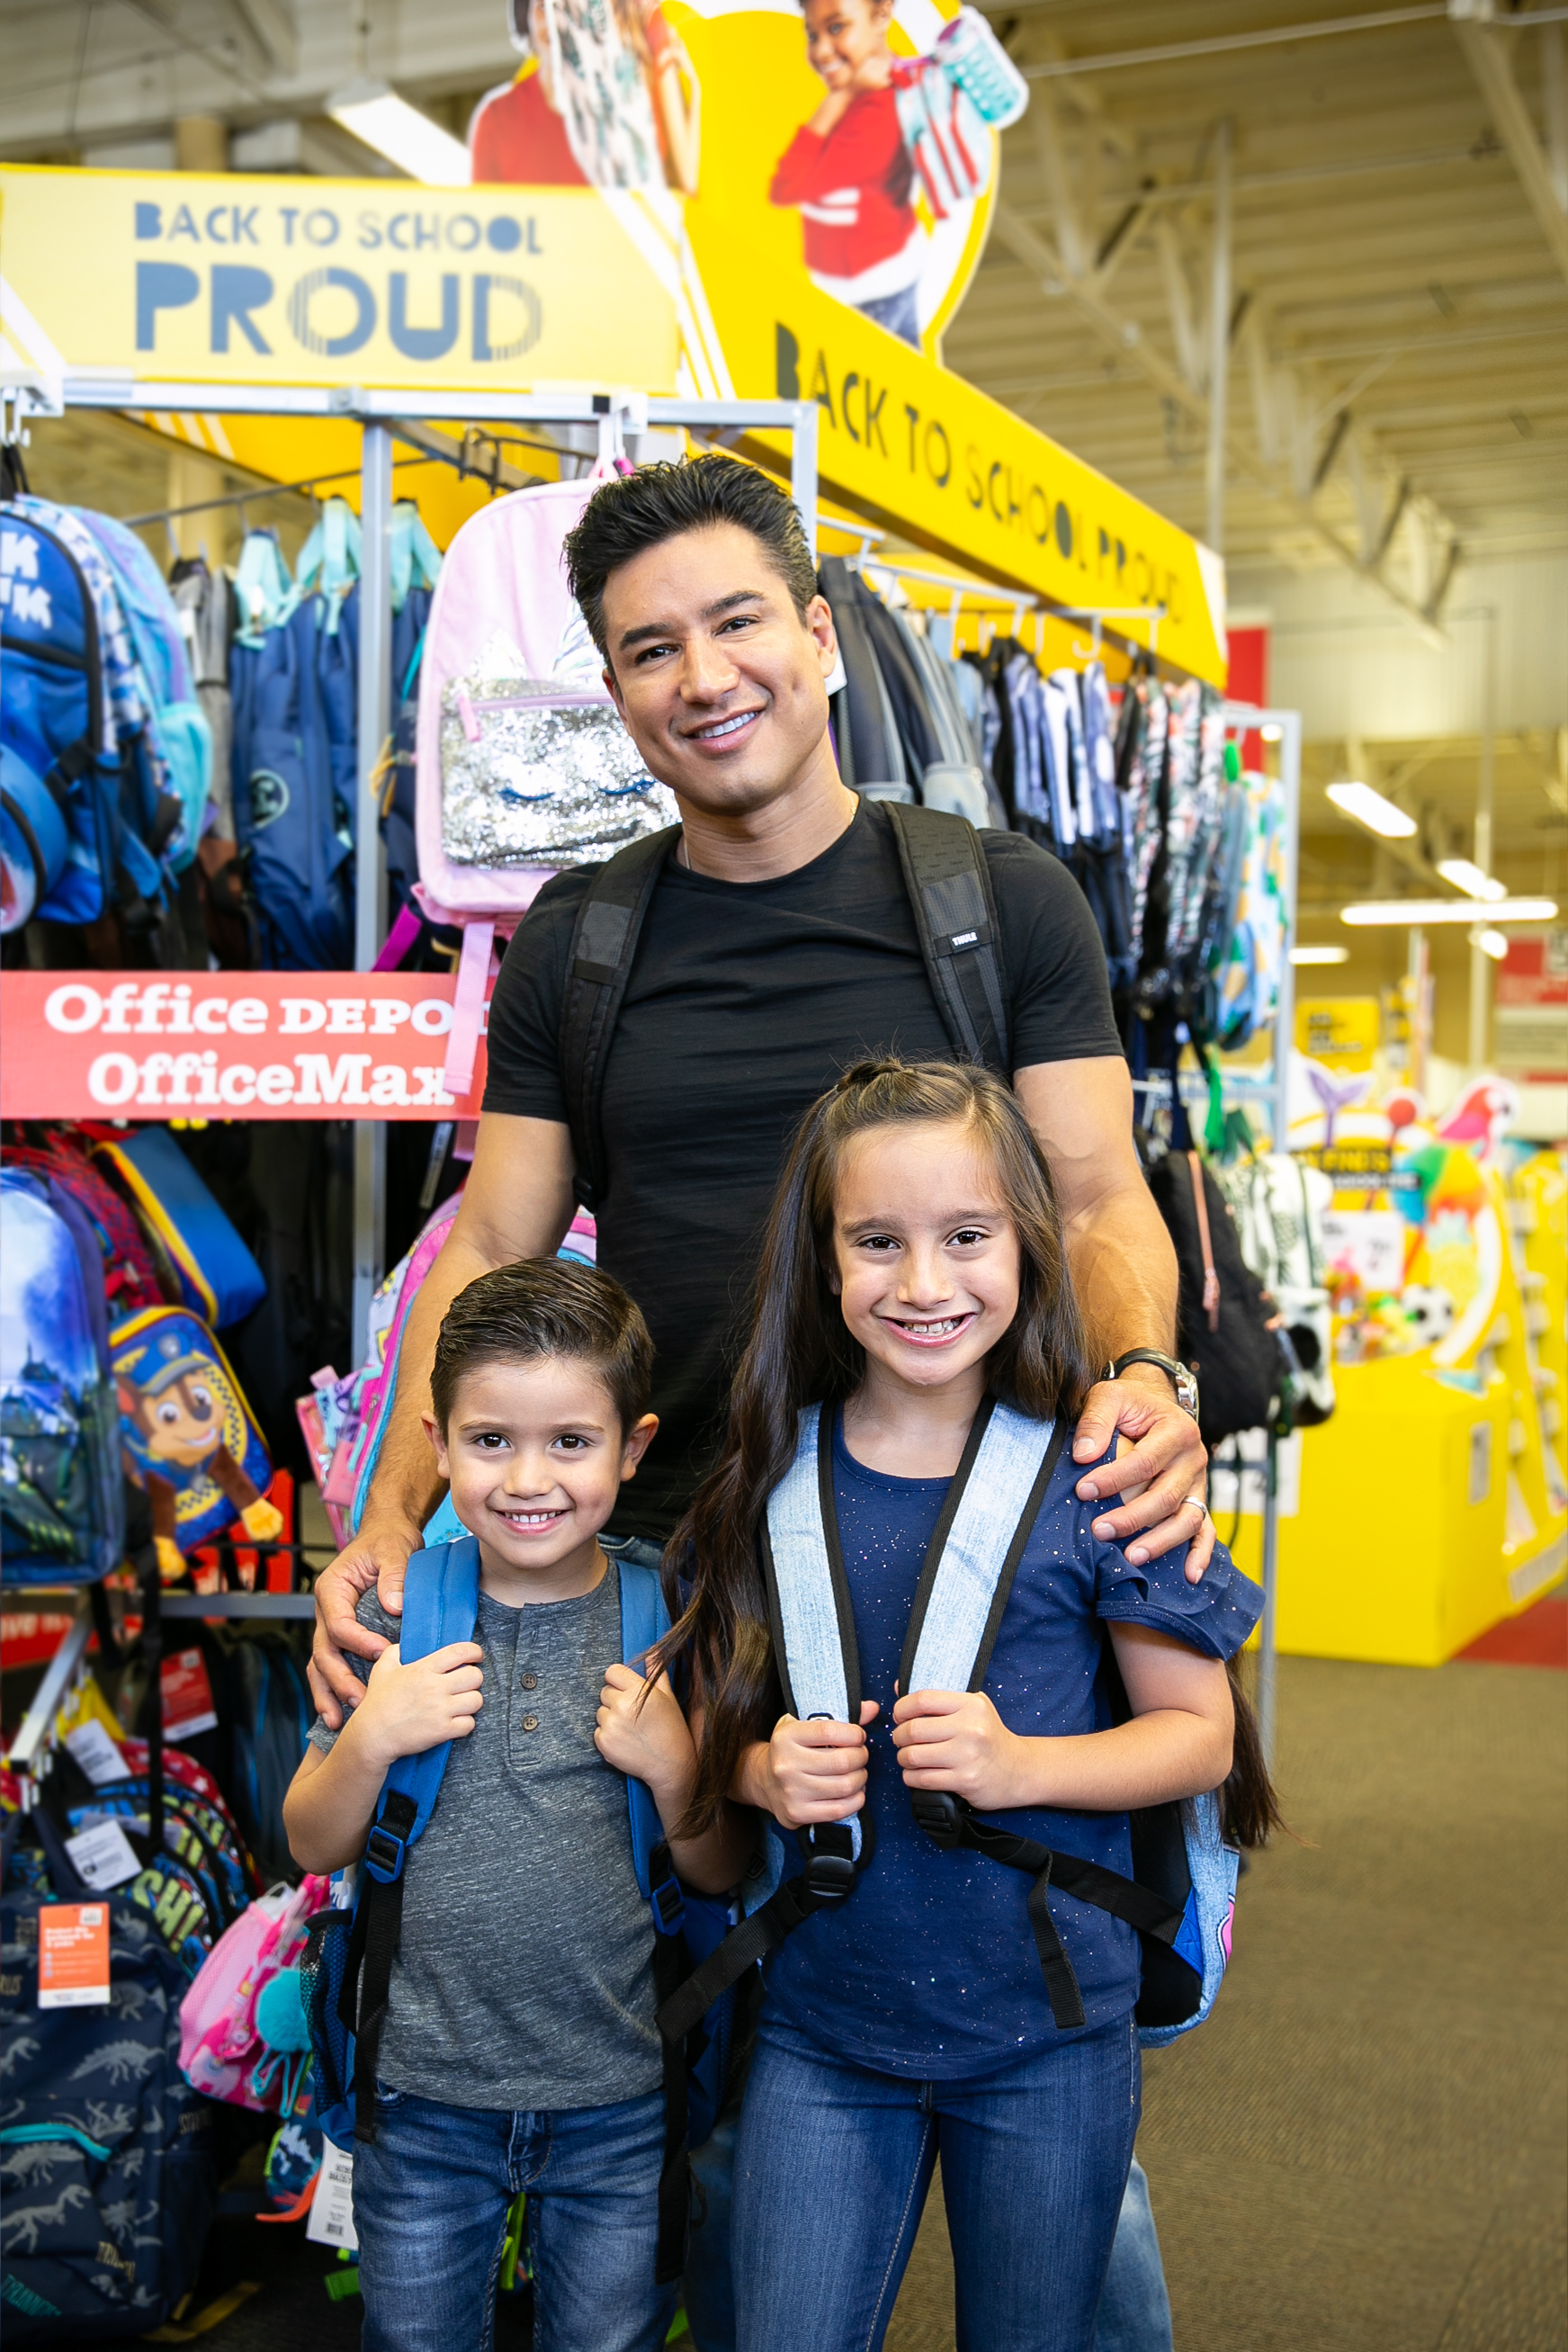 Office Depot Launches 'Back to School Proud' Campaign to Give Students the  Advantage They Need to Succeed With Must-Have Supplies, Tech and Furniture  | Business Wire